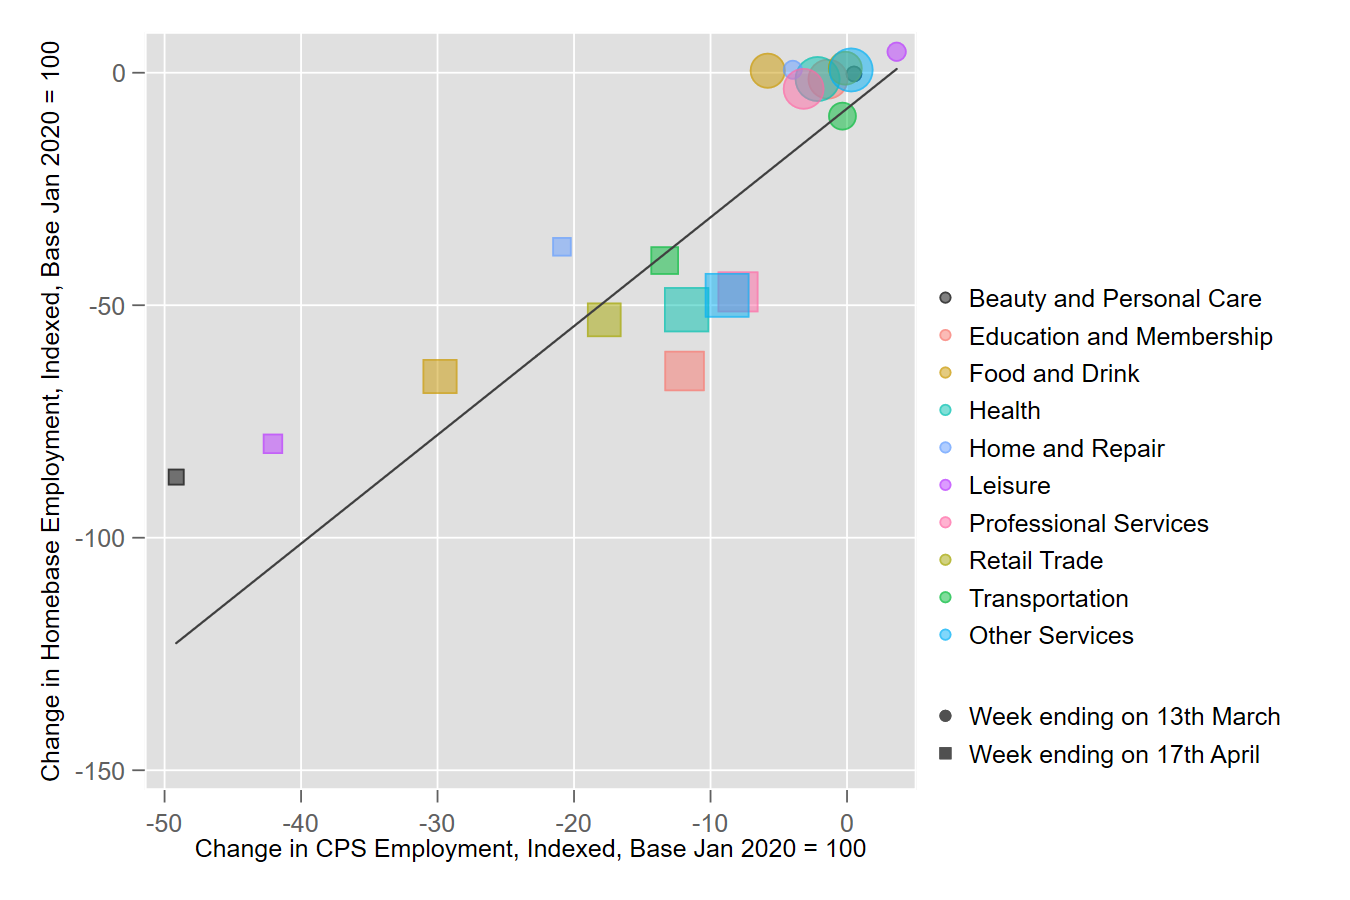 Scatter plot showing change in EPS employment by industry